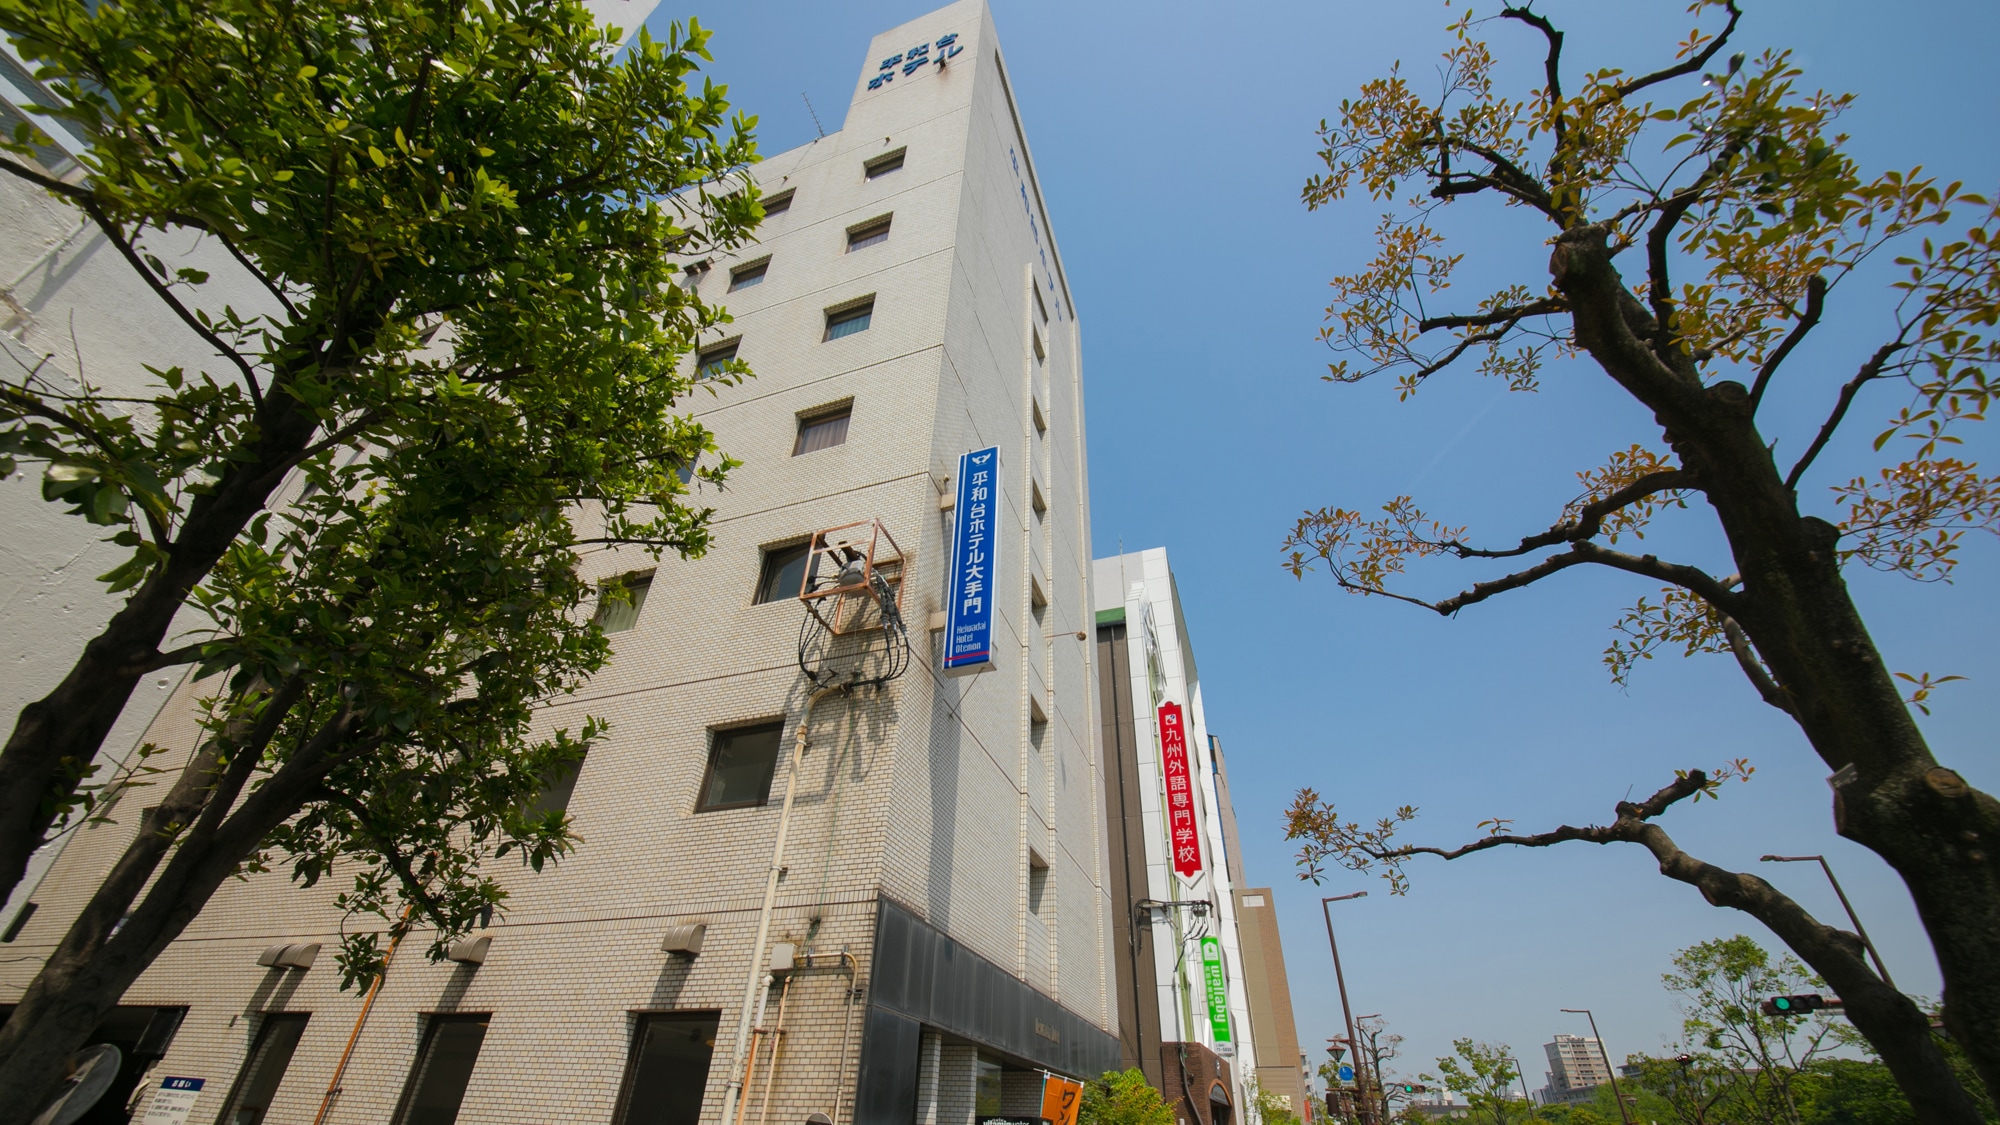 [Heiwadai Hotel Otemon] It's a 6-minute walk from Ohori Park on the subway line♪ Look for the blue sign (^O^)